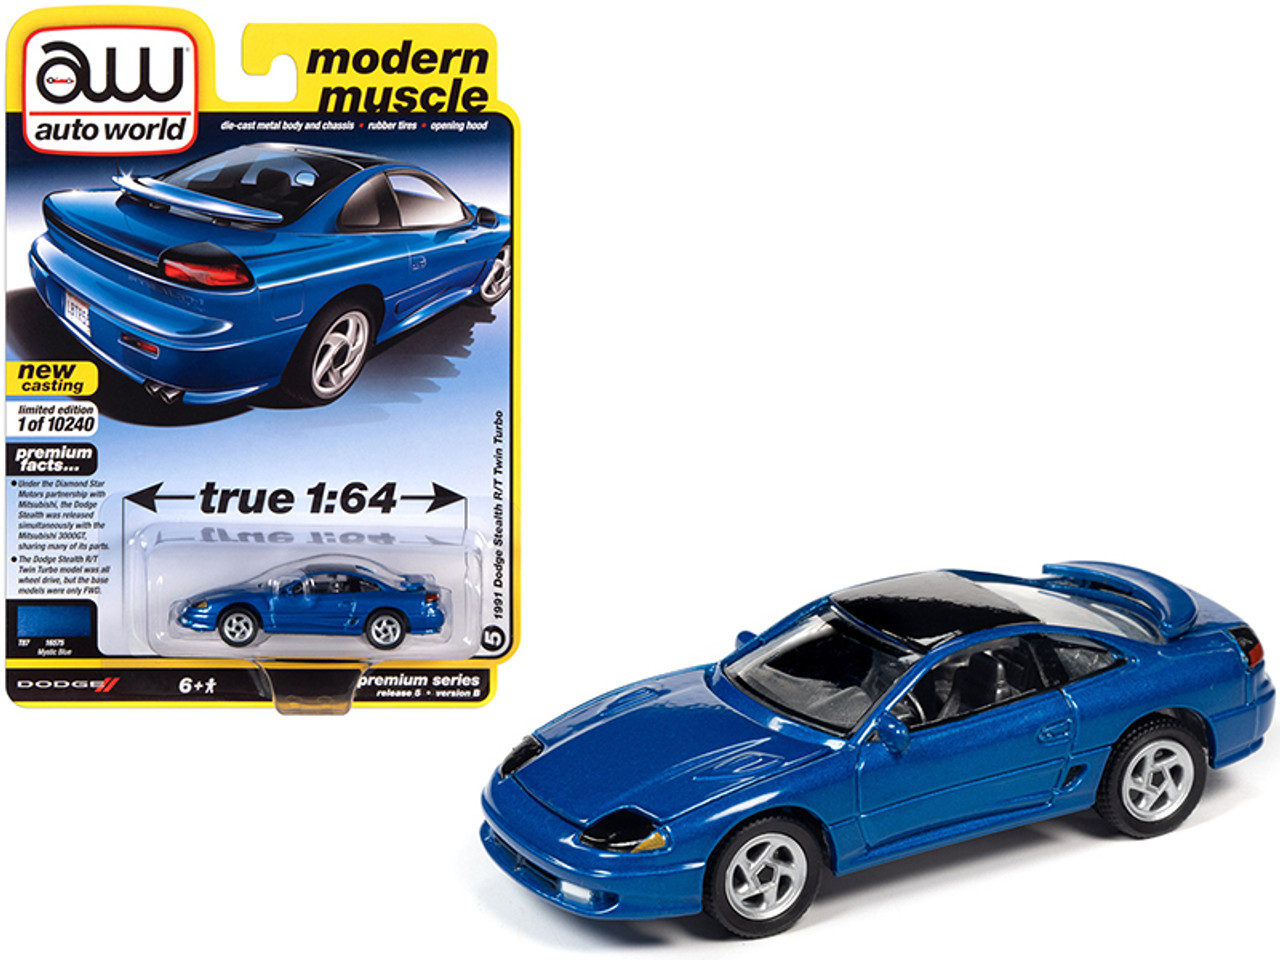 1991 Dodge Stealth R/T Twin Turbo Mystic Blue Metallic with Black Top "Modern Muscle" Limited Edition to 10240 pieces Worldwide 1/64 Diecast Model Car by Autoworld